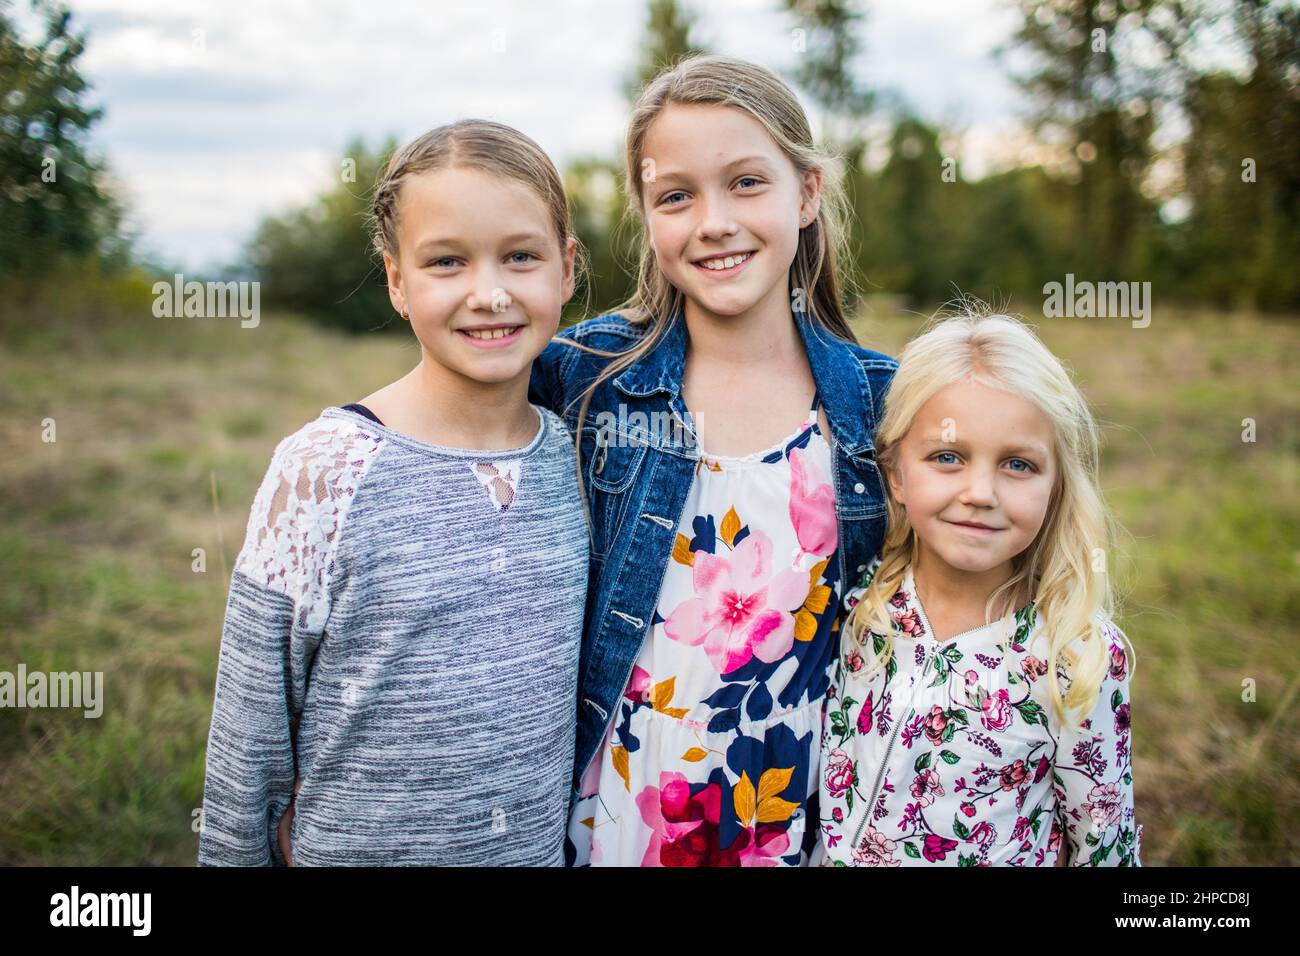 3 sisters status • ShareChat Photos and Videos